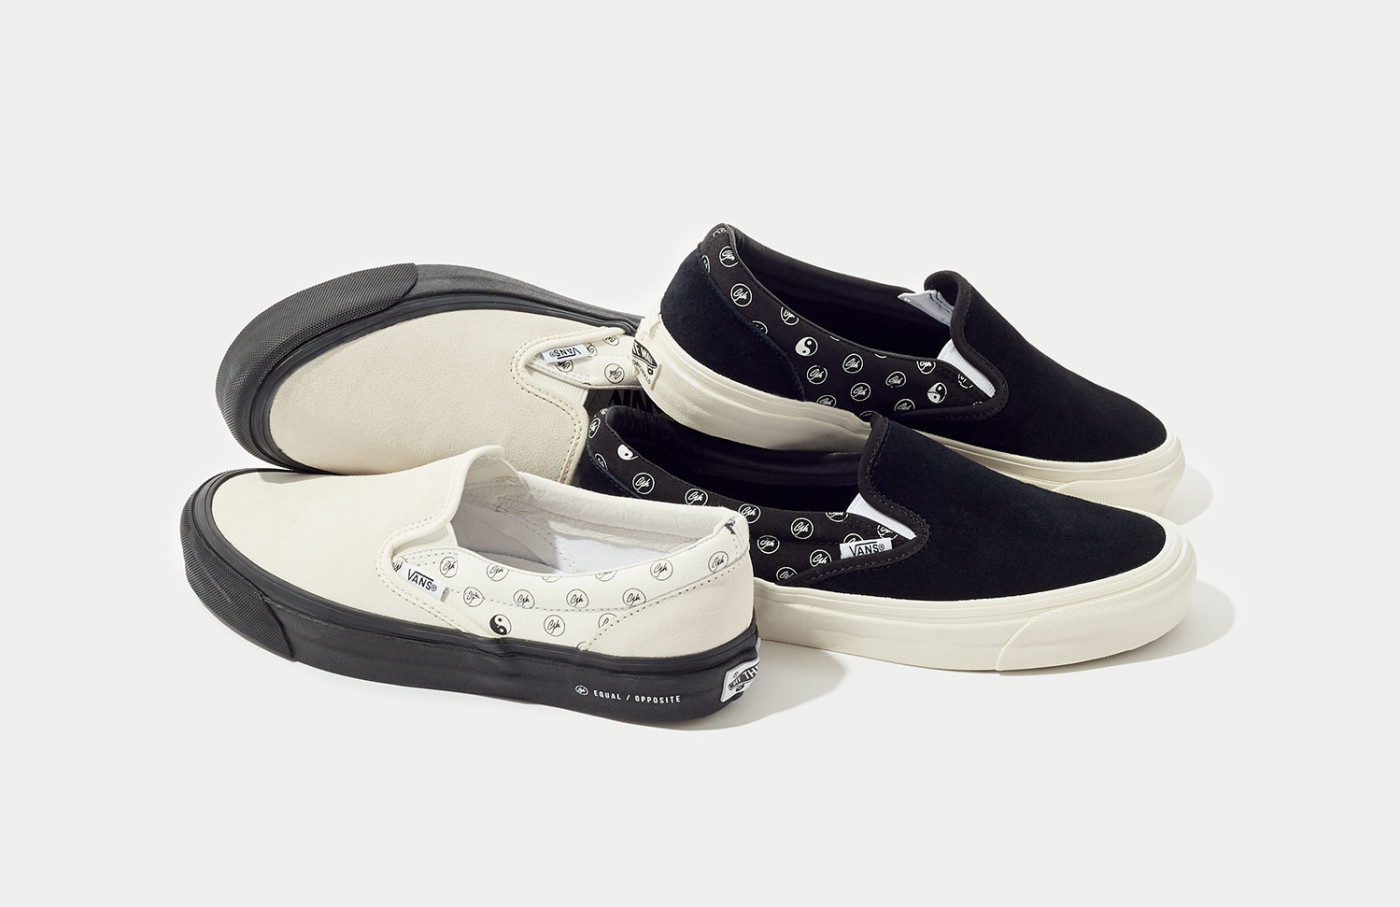 Goodhood and Vans Connect for the Second Part of EQUAL/OPPOSITE ... شكل الدماغ